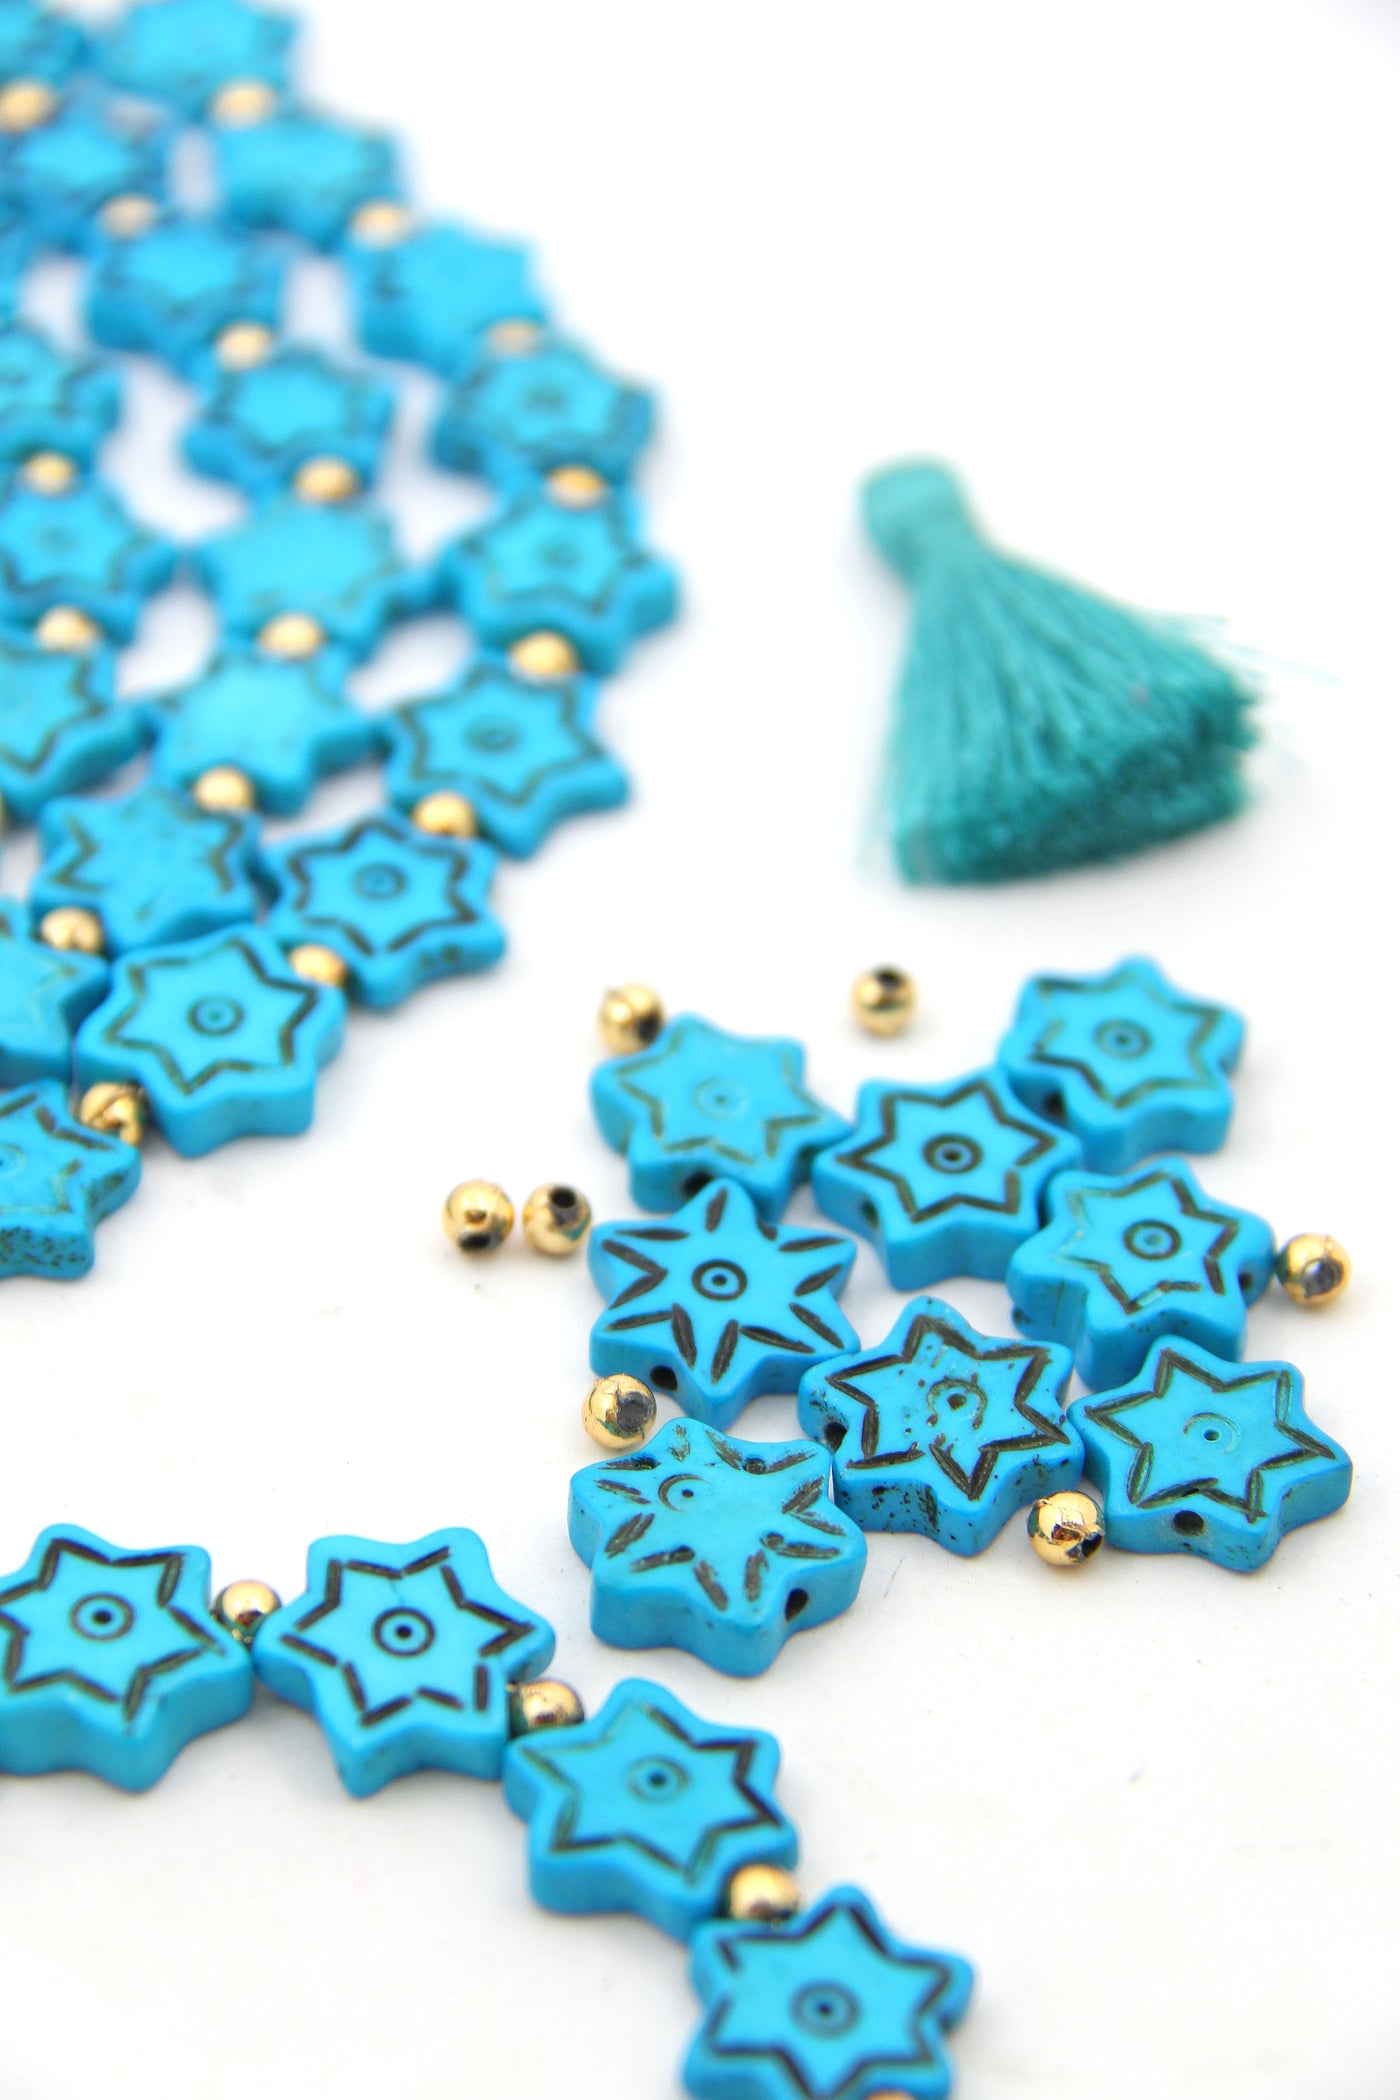 Star Shaped Bone Beads, Turquoise Hand Carved Focal Beads, 15x17mm, 15 beads